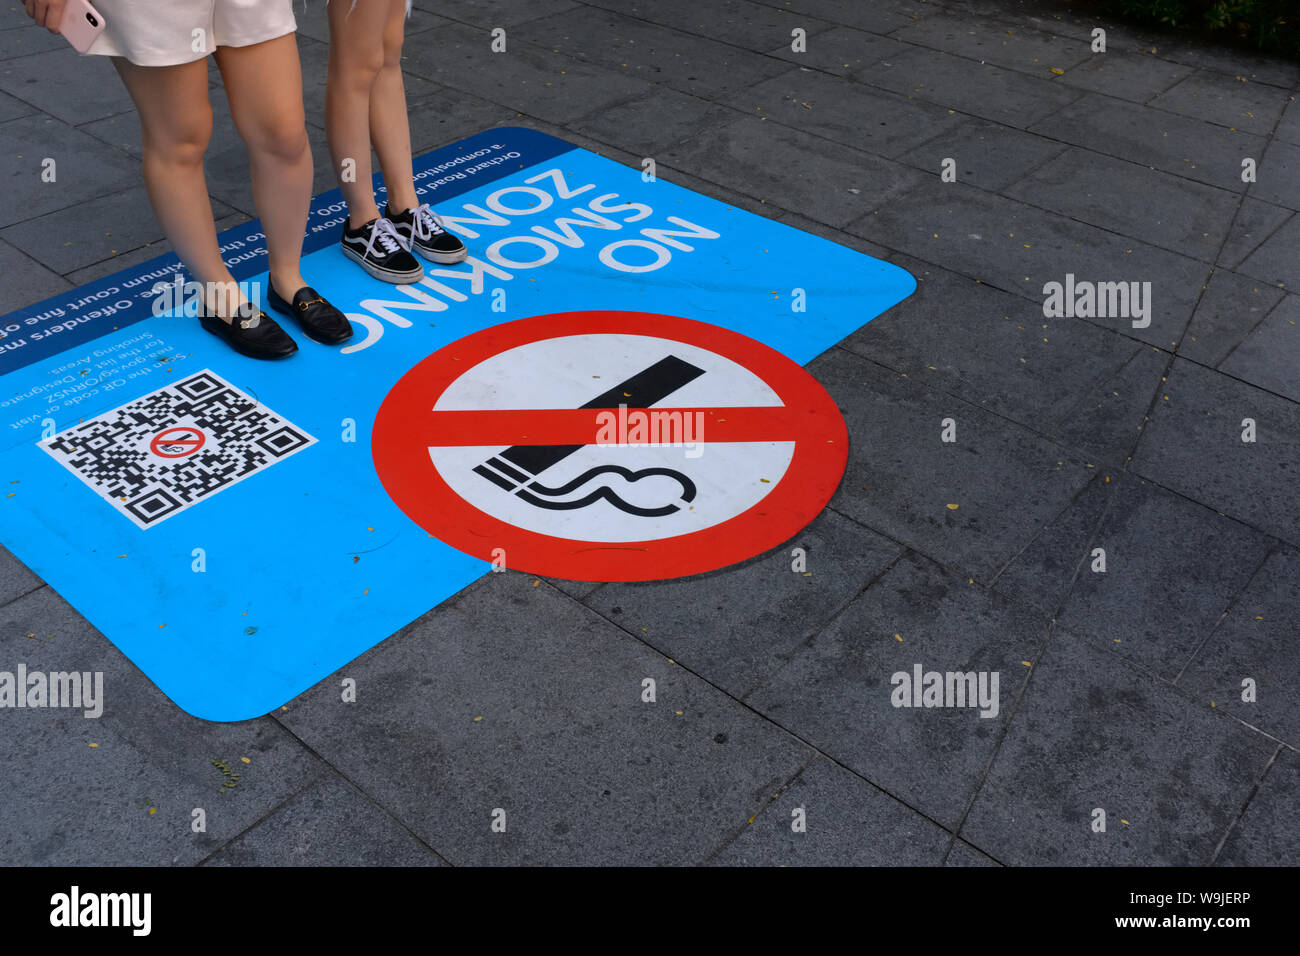 Luxury shopping precinct Orchard Road, Singapore, turned a non-smoking zone in 2019, and signs painted on the footpath warn trespassers of heavy fines Stock Photo